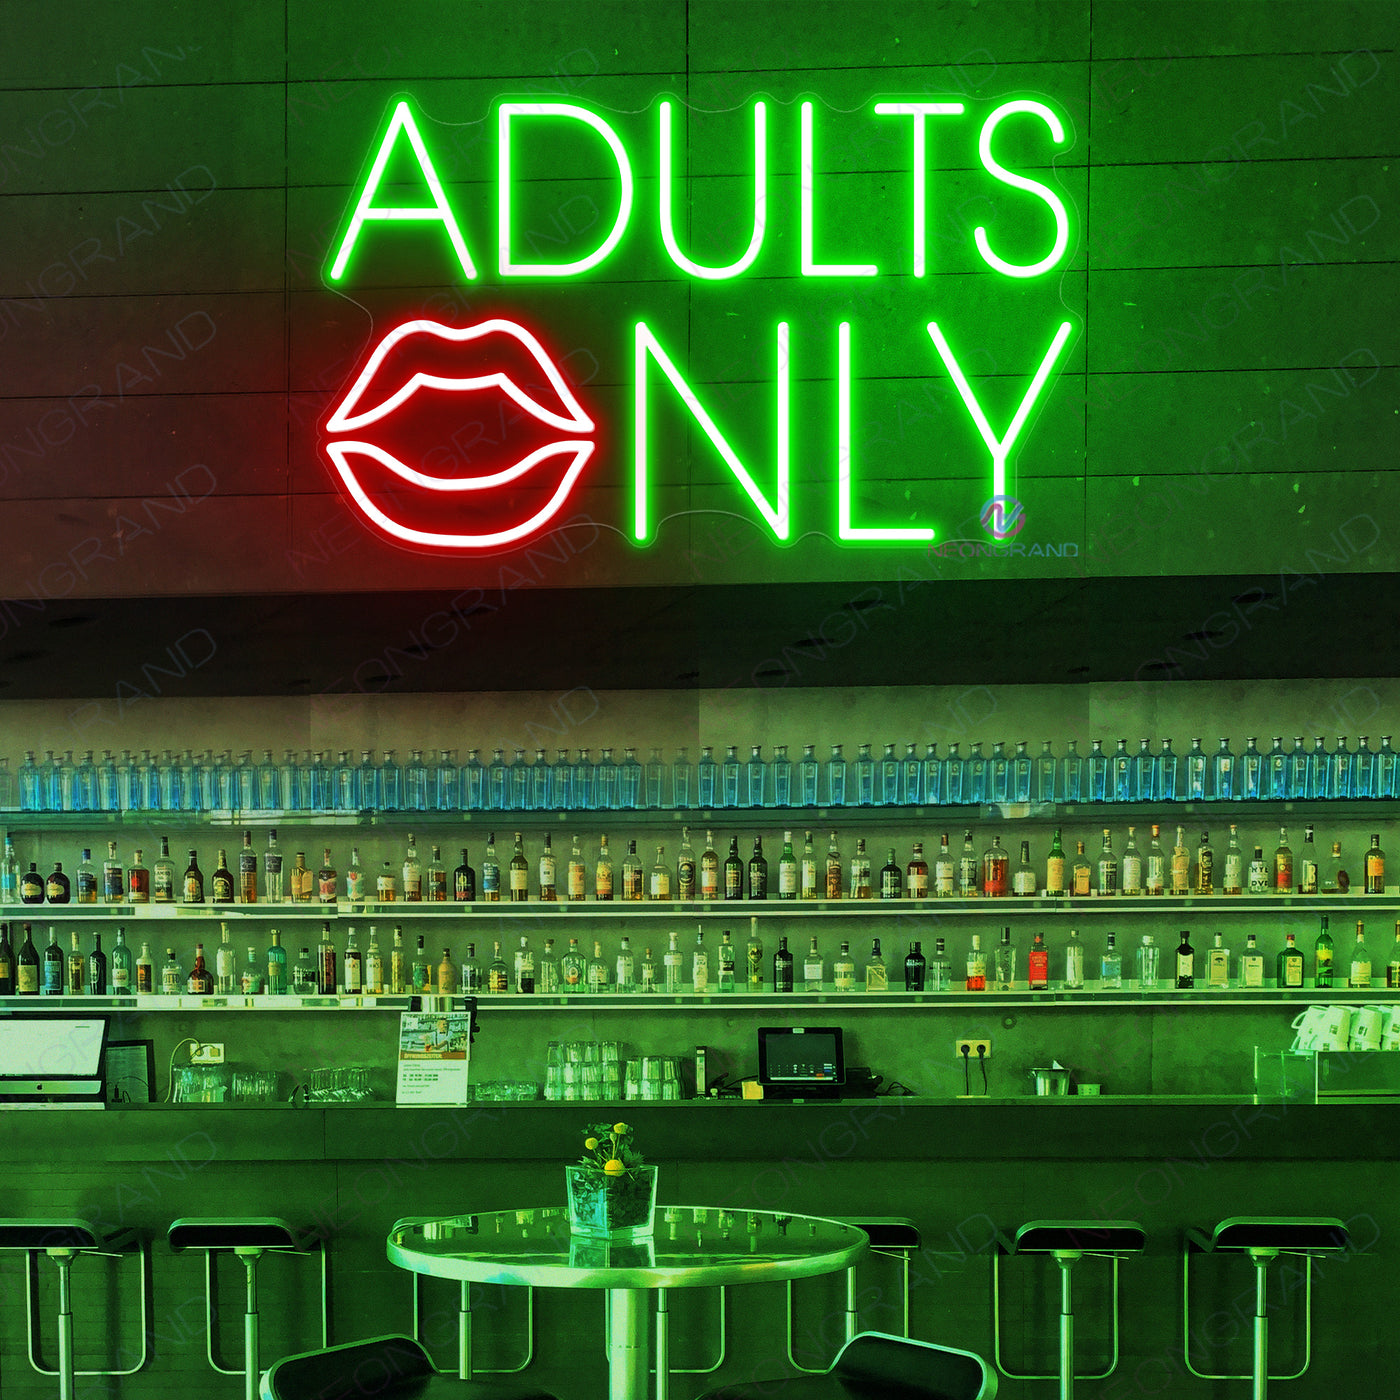 Adults Only Neon Sign Bar Led Light green